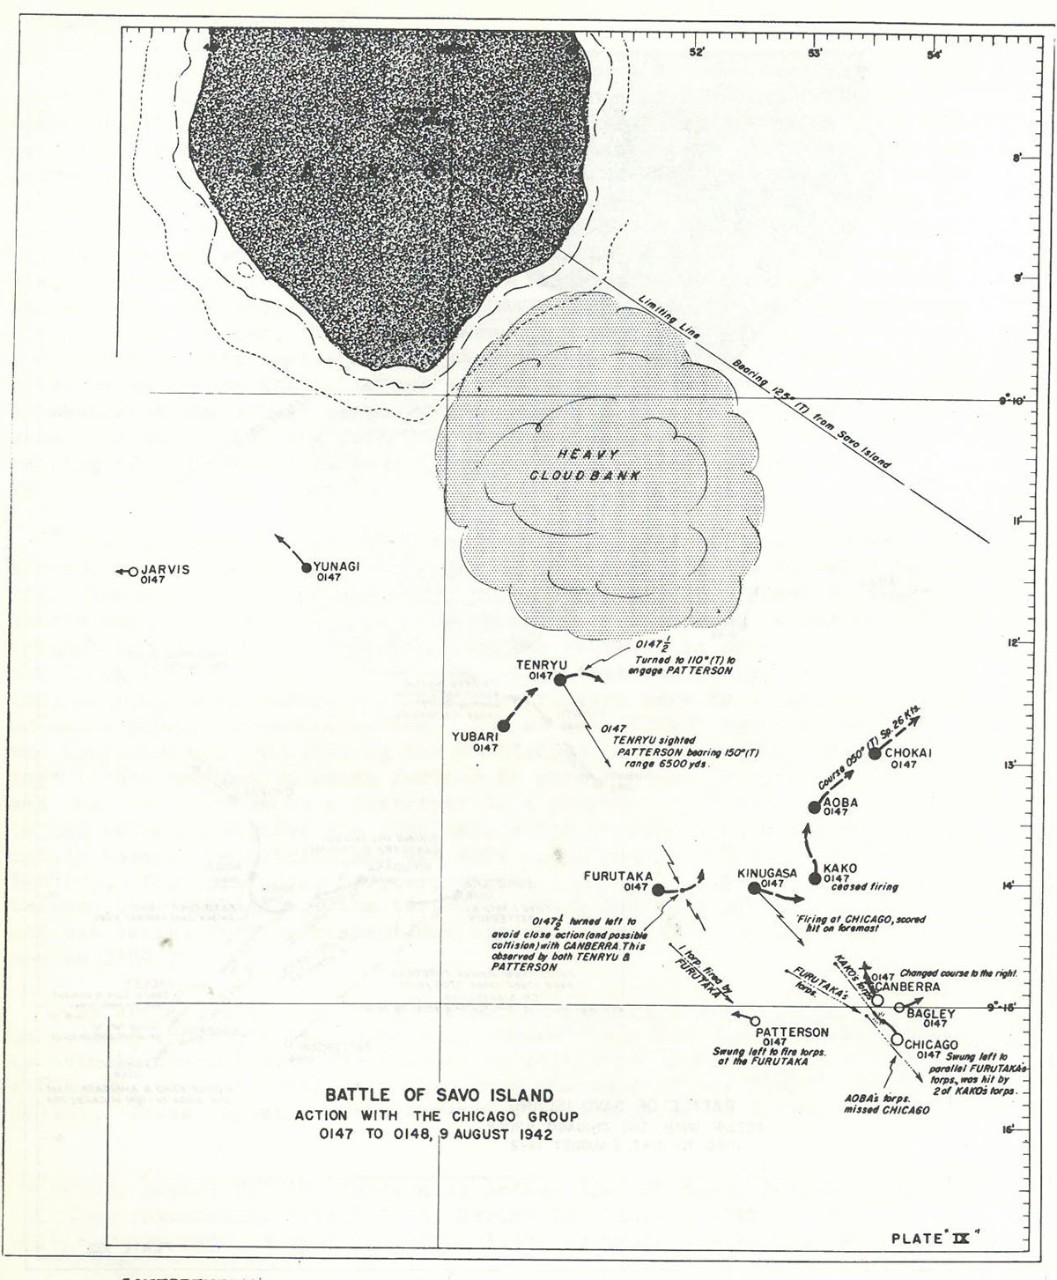 Plate 9: Battle of Savo Island, Action with the CHICAGO Group, 0147 to 0148, 9 August 1942 - chart - The Battle of Savo Island August 9, 1942 Strategical and Tactical Analysis